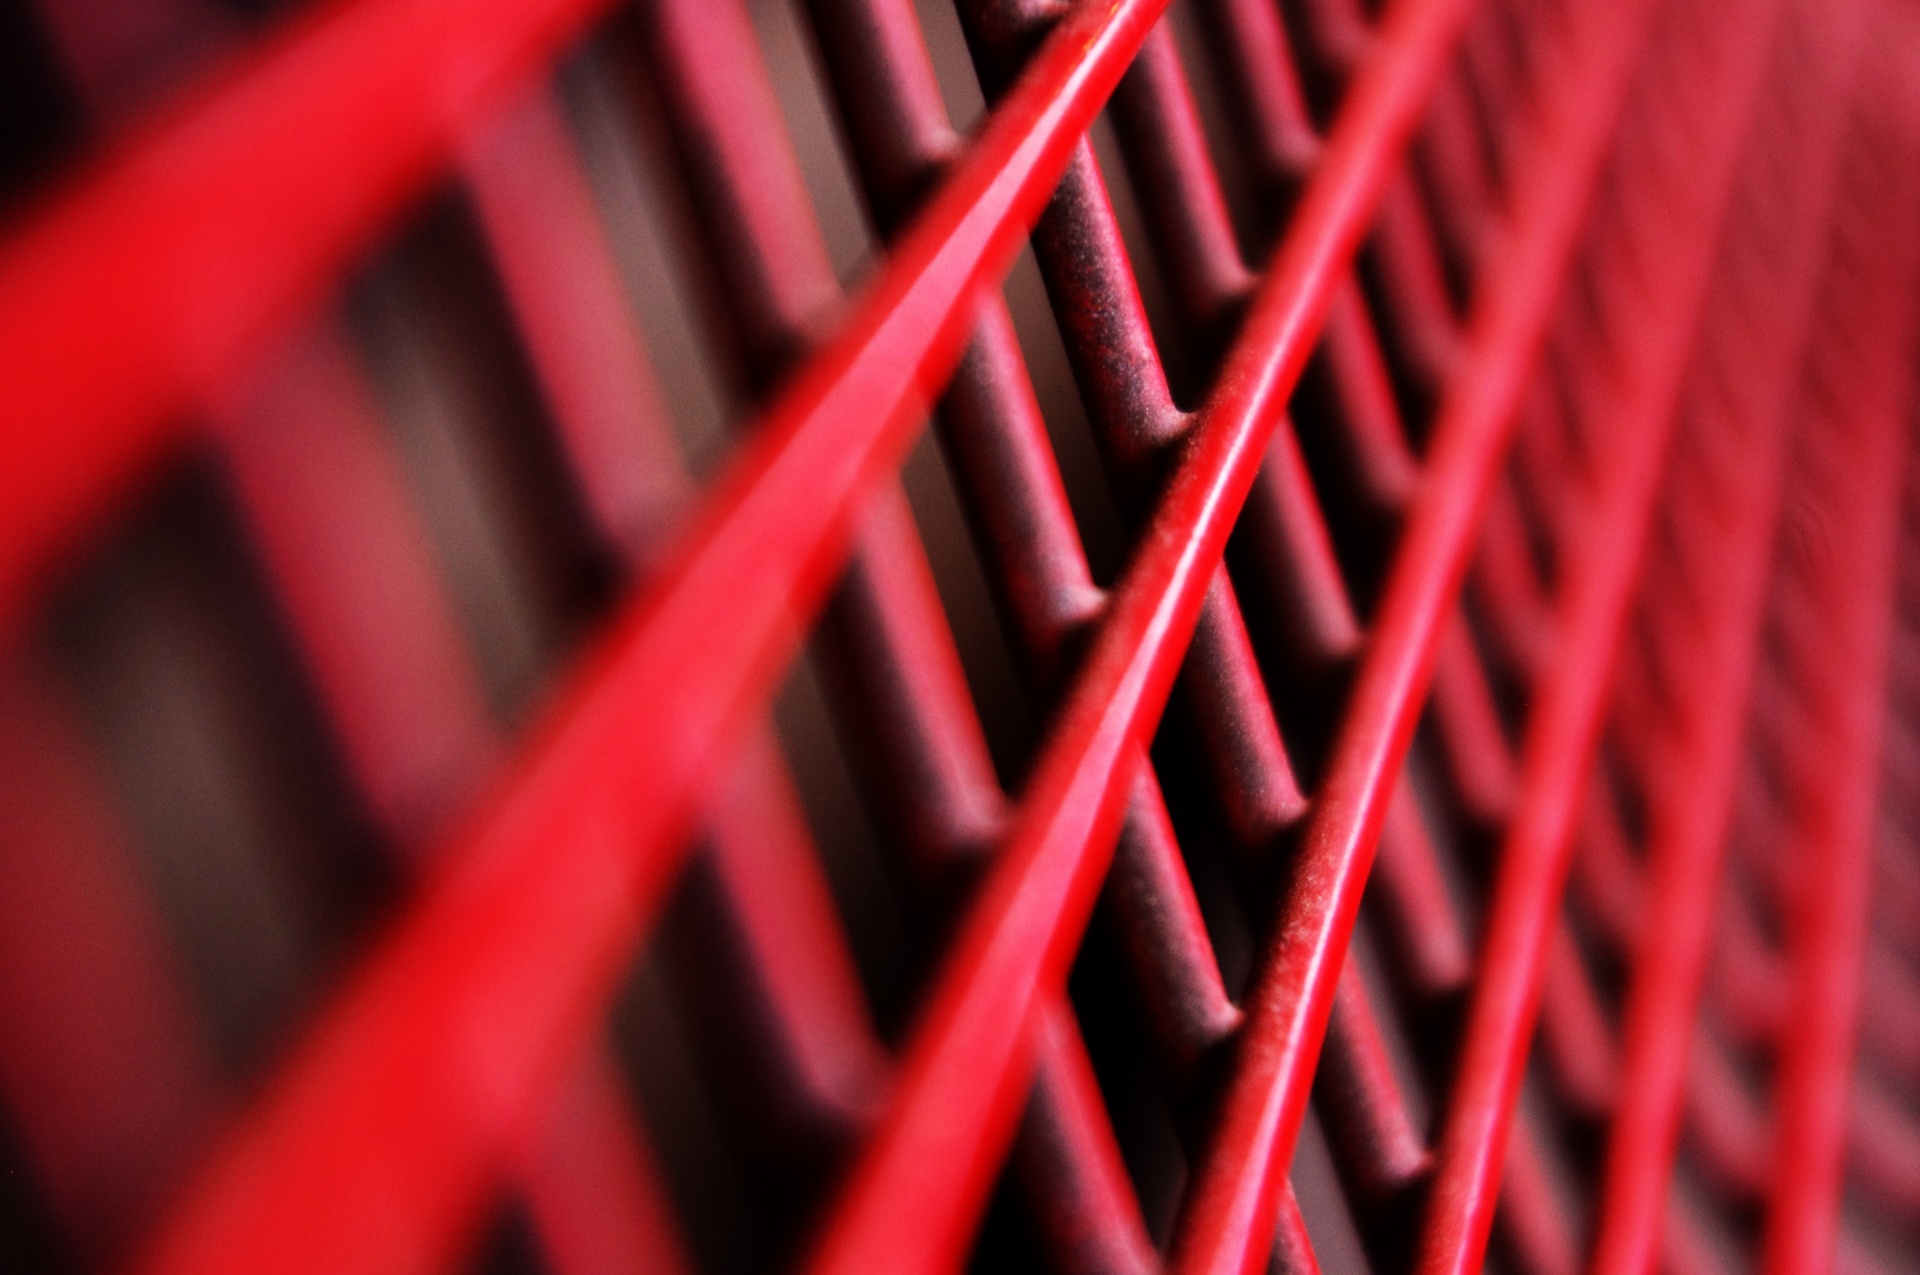 Abstract of a red metal chair